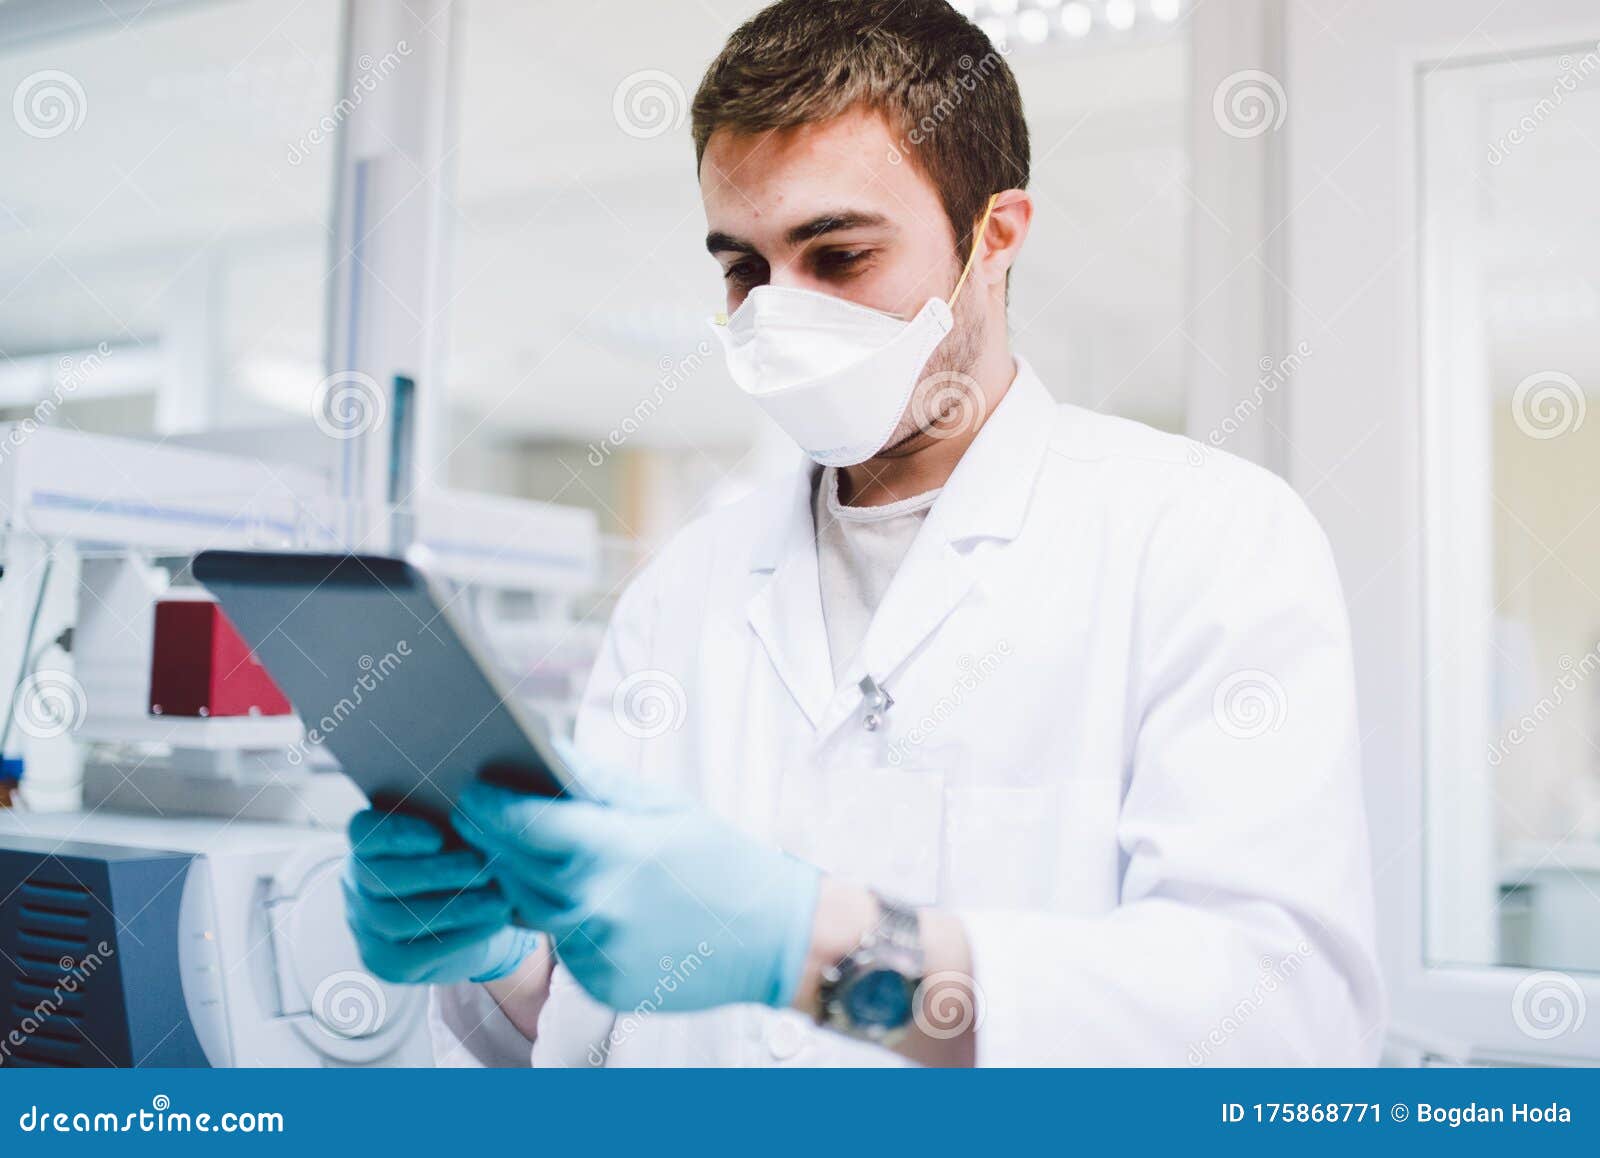 doctor in the laboratory with dna machinery and tablet analysing samples of covid19 infectious disease. coronavirus